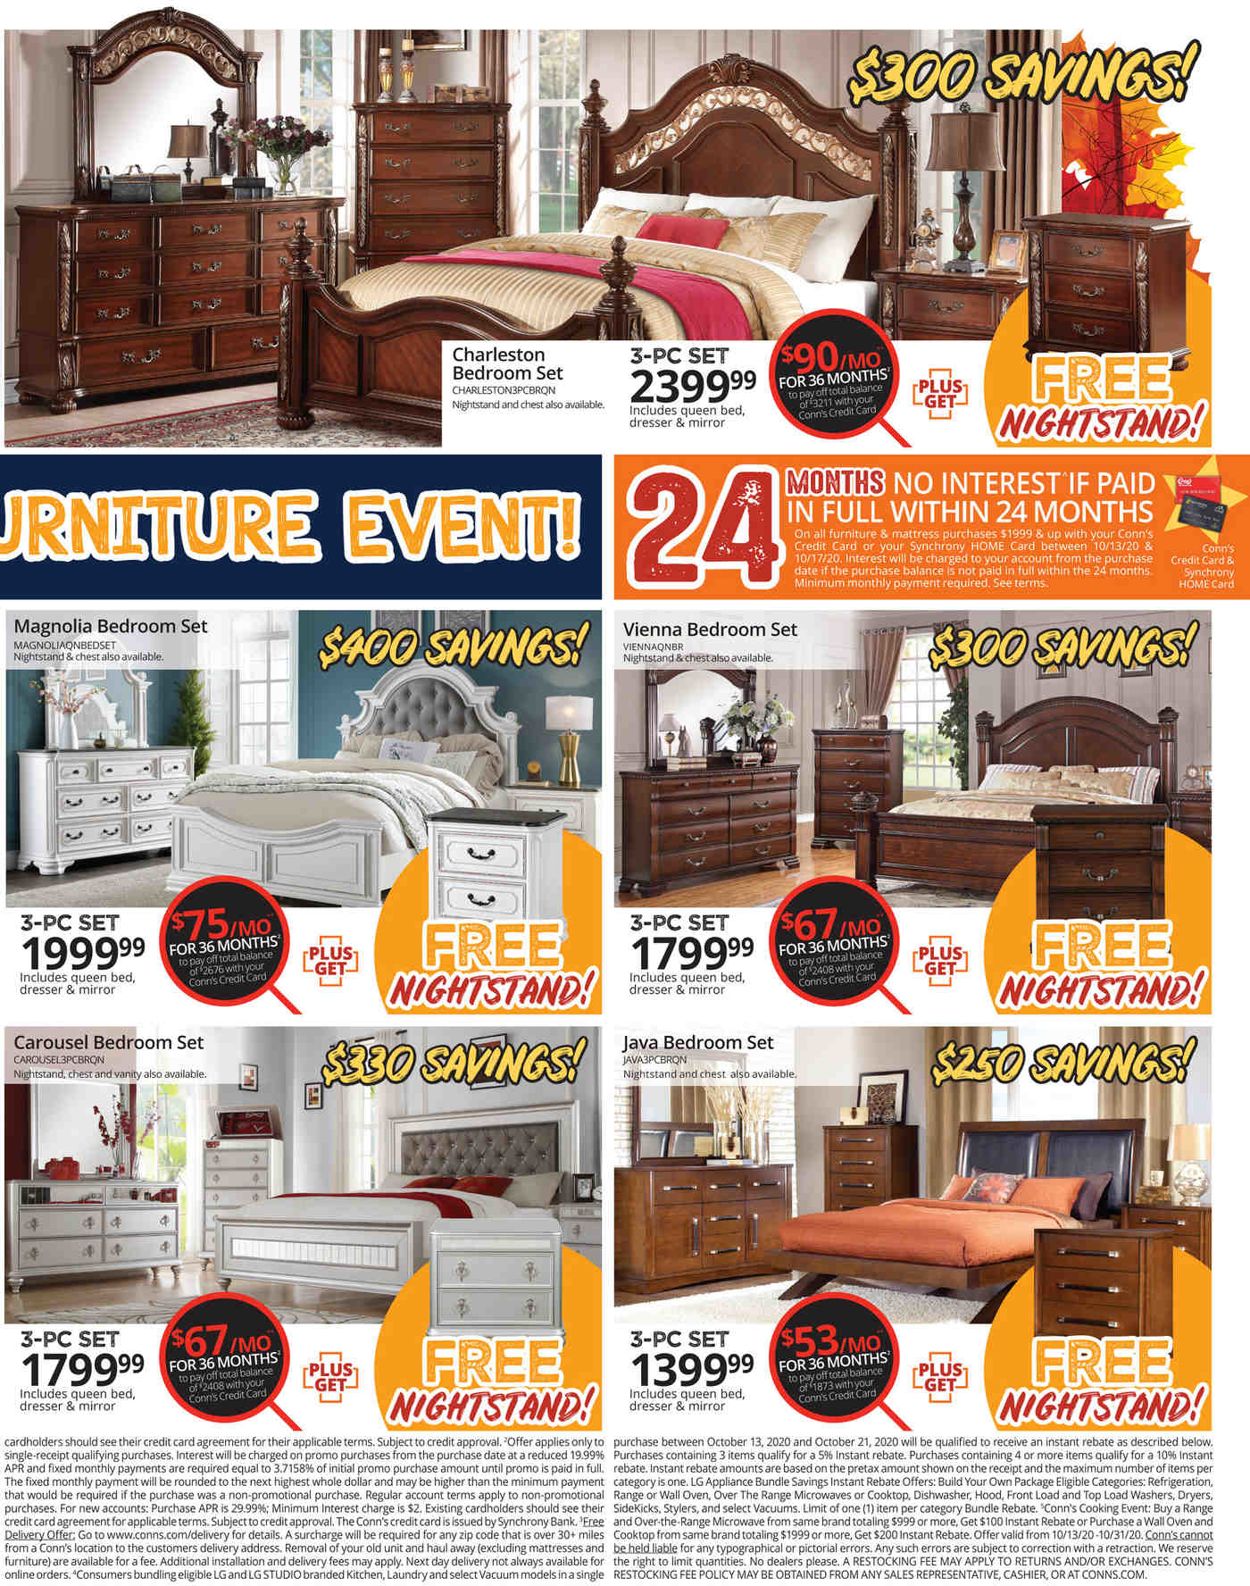 Conn's Home Plus Ad from 10/13/2020